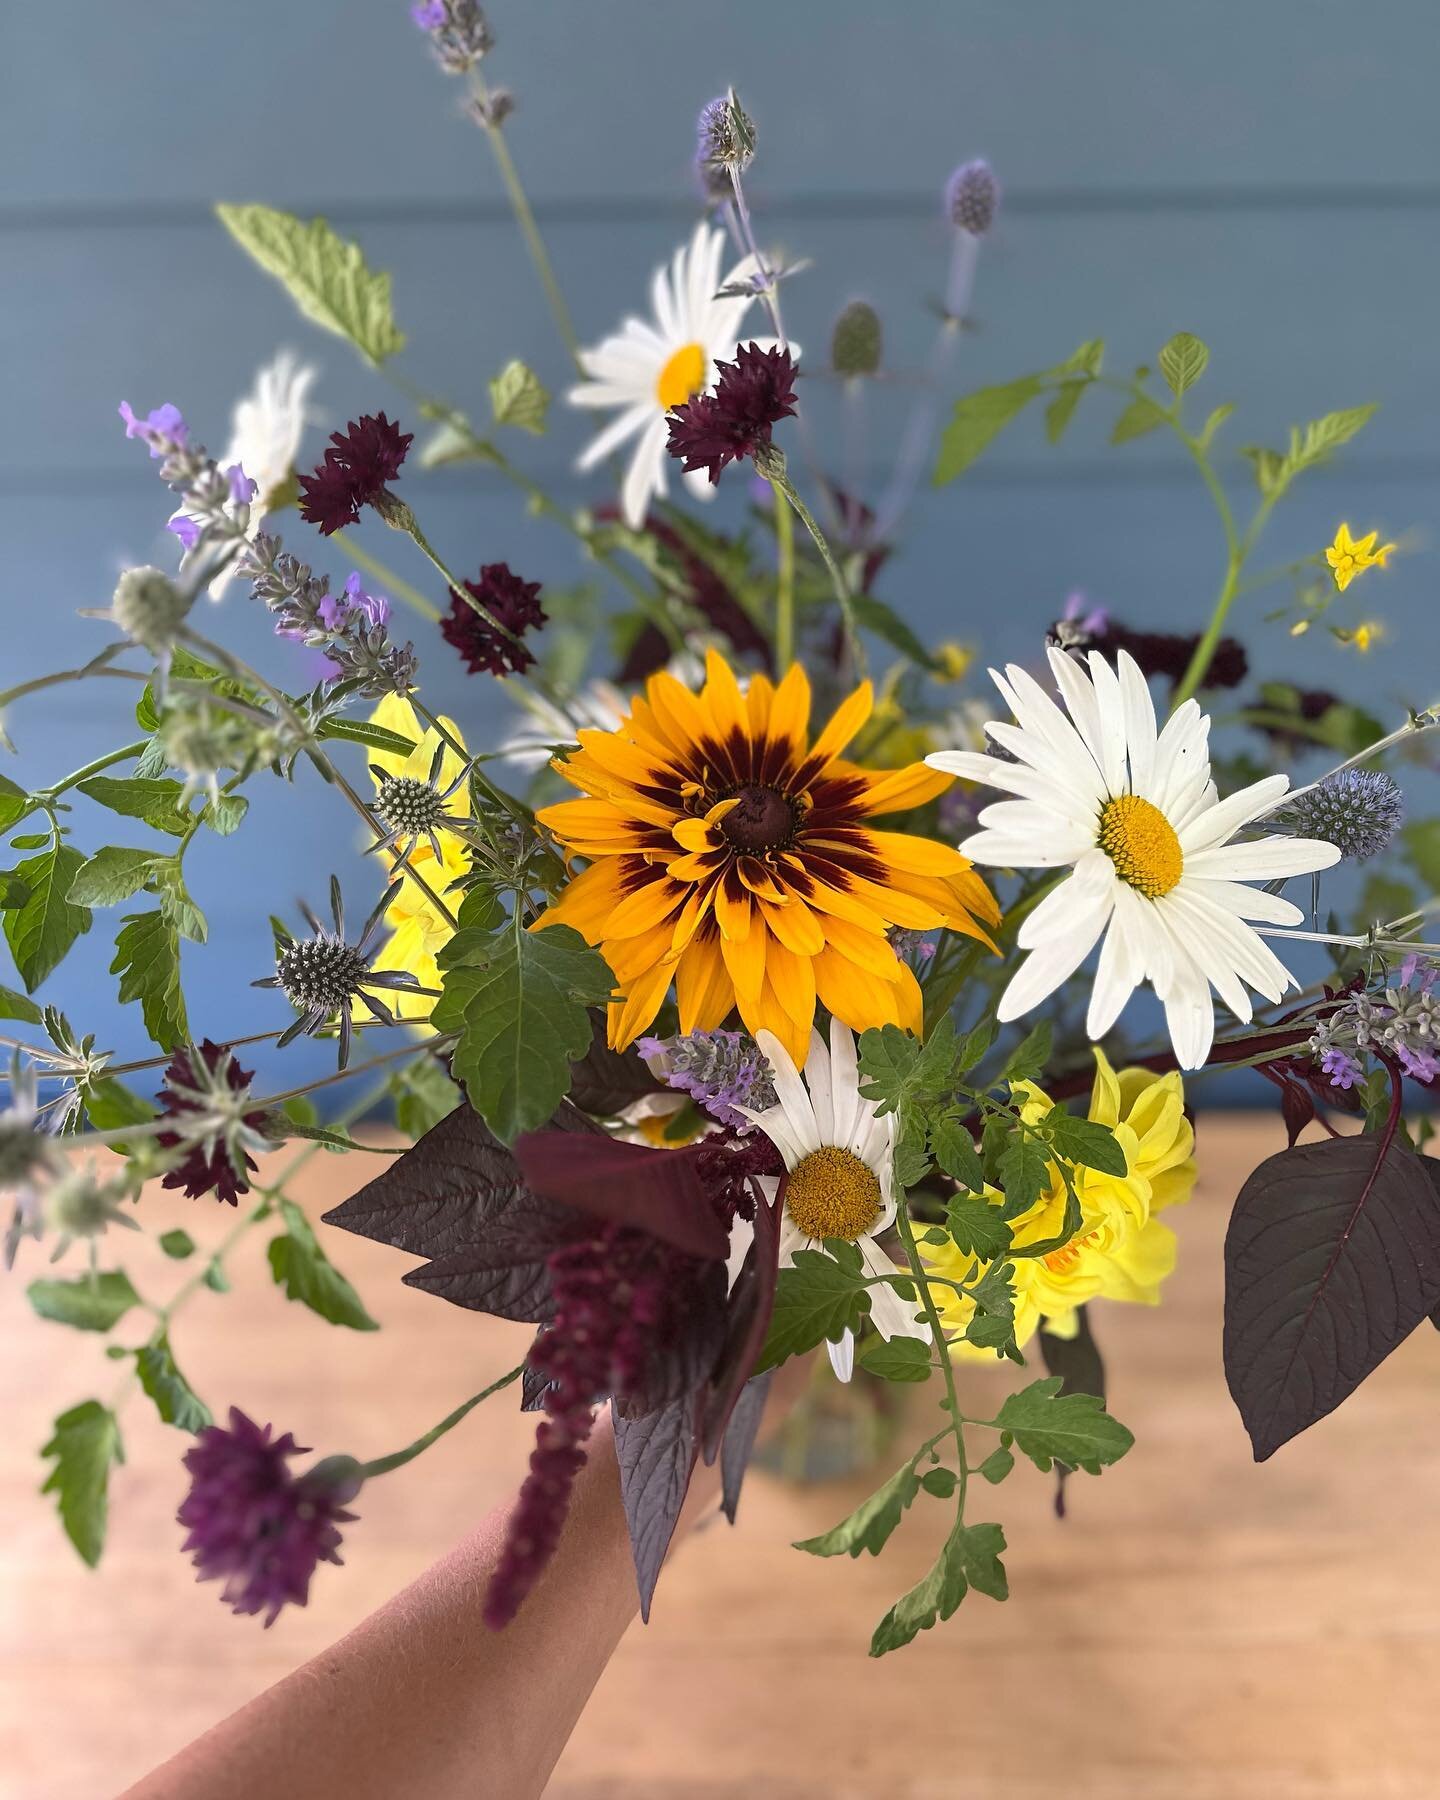 Sprightly little bouquet featuring the first Denver Daisy rudbeckia of the season! #flowers #bouquets #flowerfarmer #csa #summer